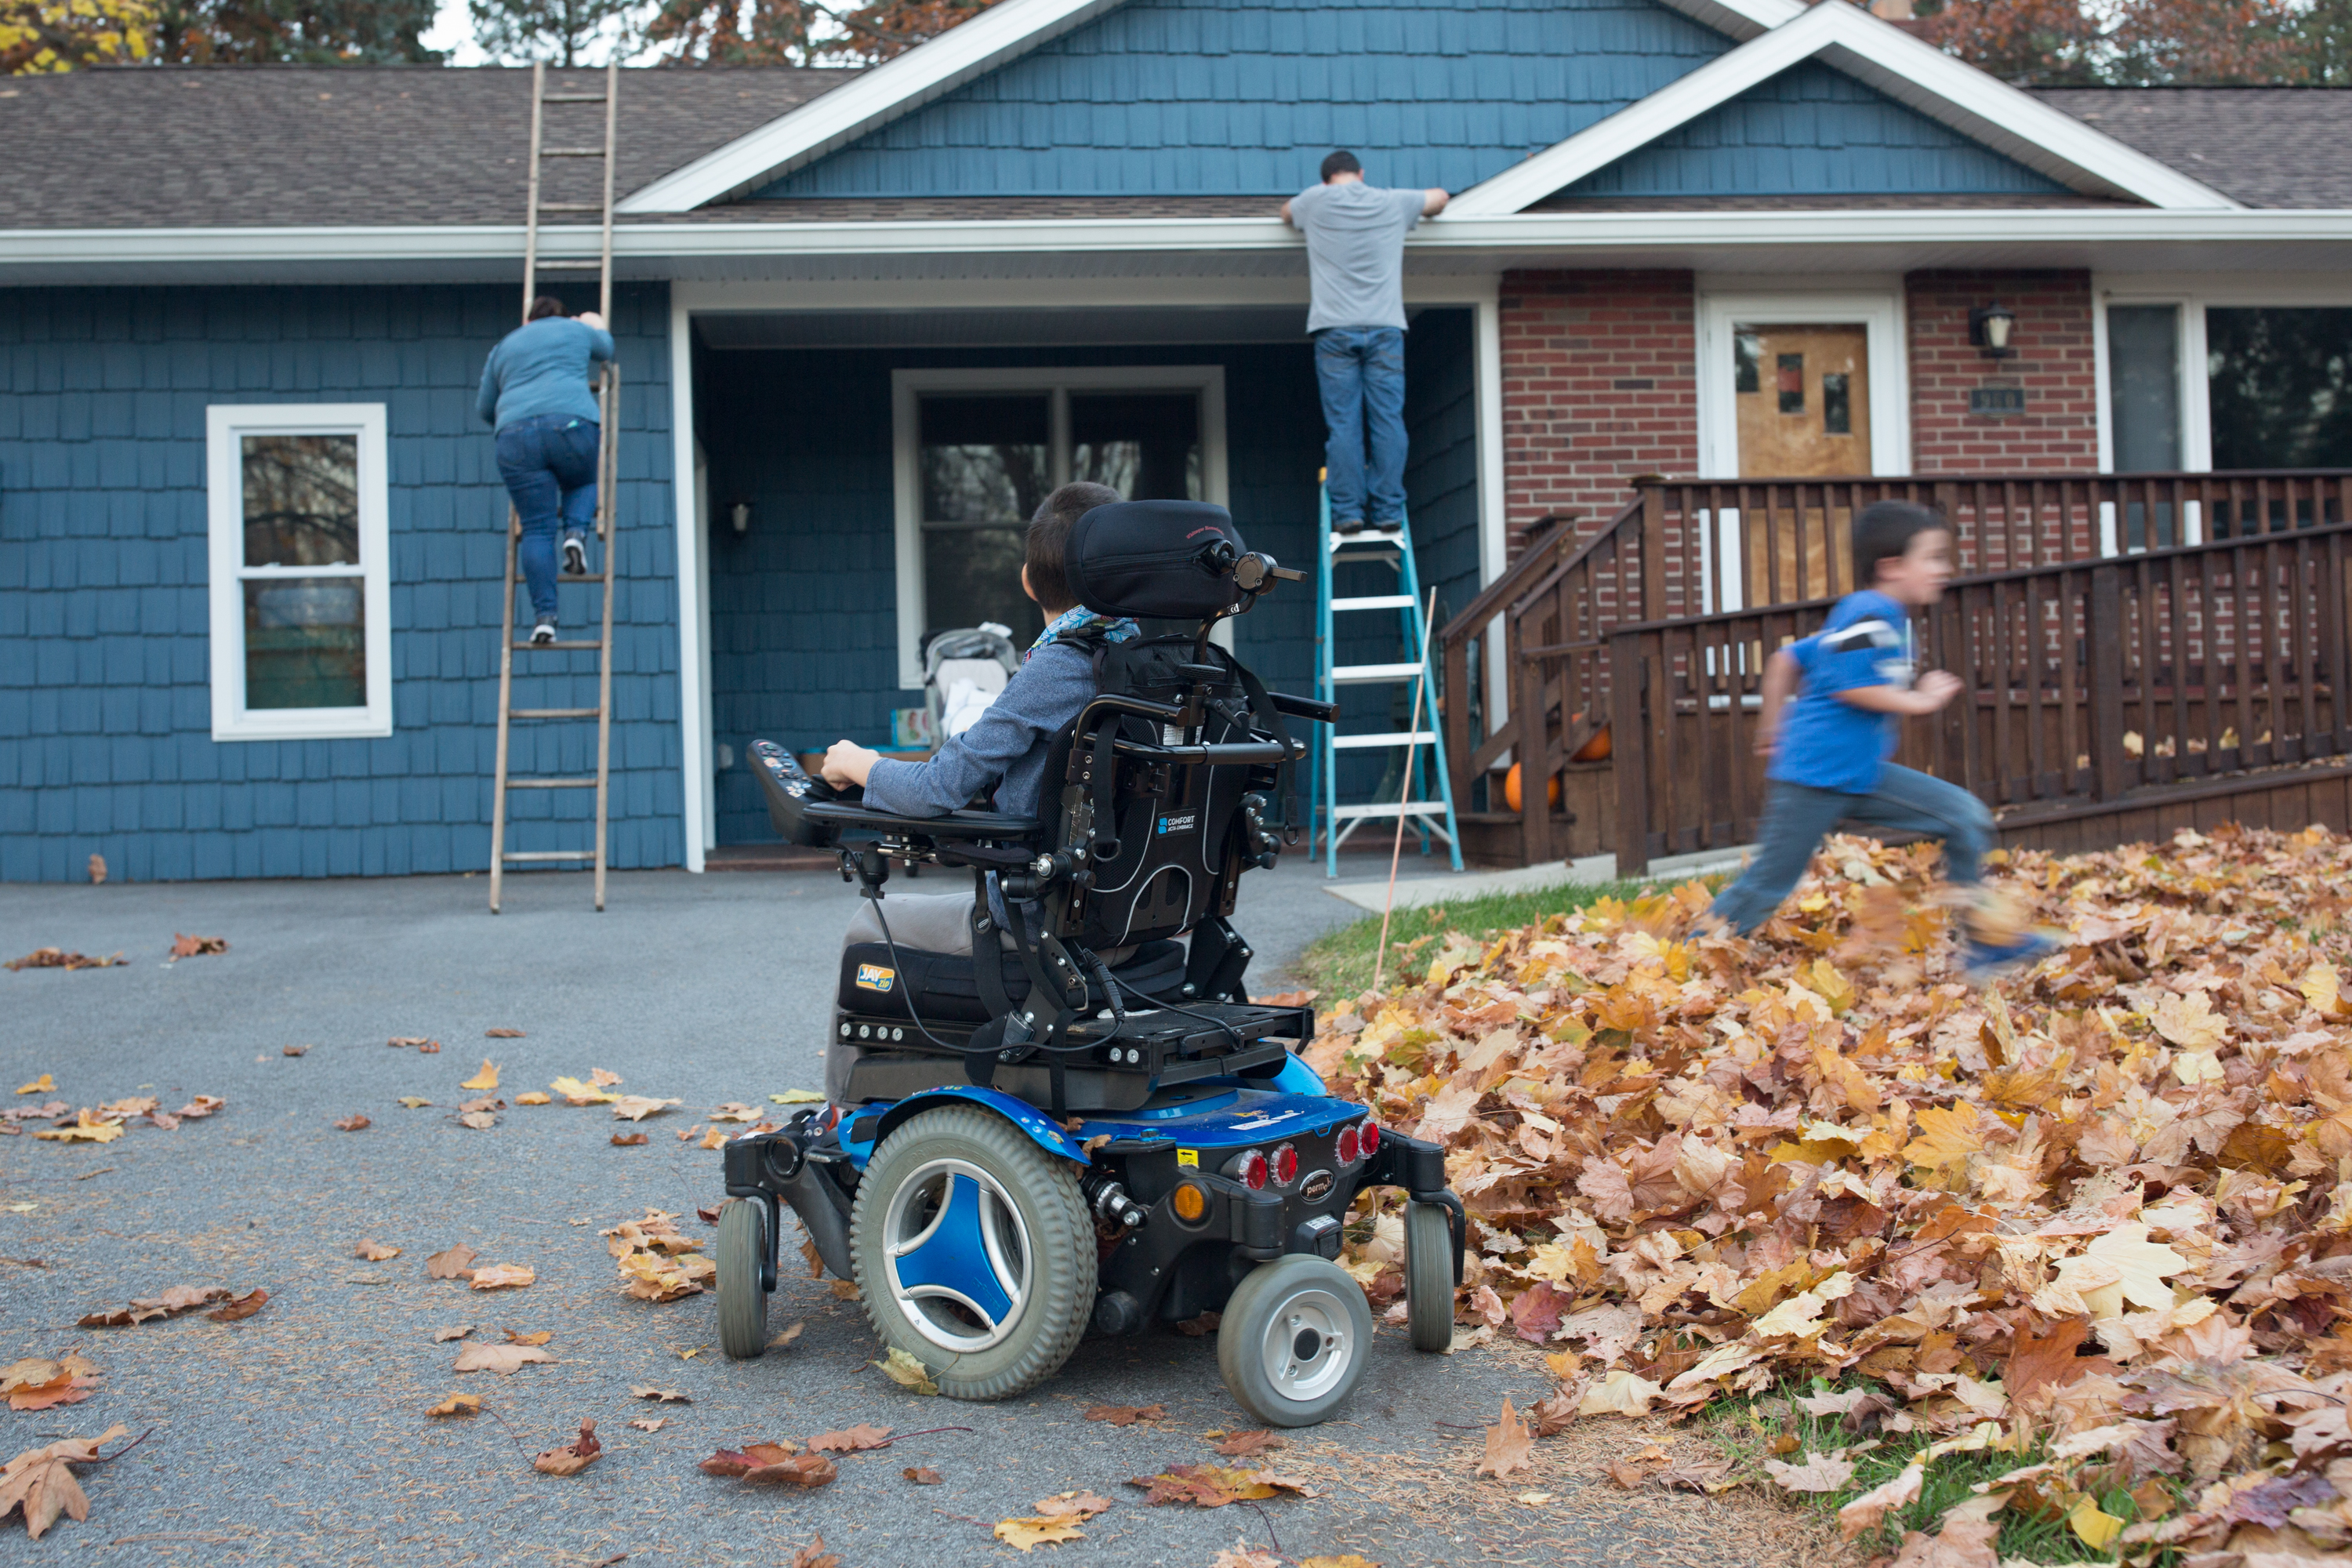 Josh Nodine, 8, watches as his parents setup christmas lights and Caleb Nodine, 6, runs into a leaf pile on Friday, November 18, 2016. Josh was diagnosed with Cerebral Palsy as an infant.